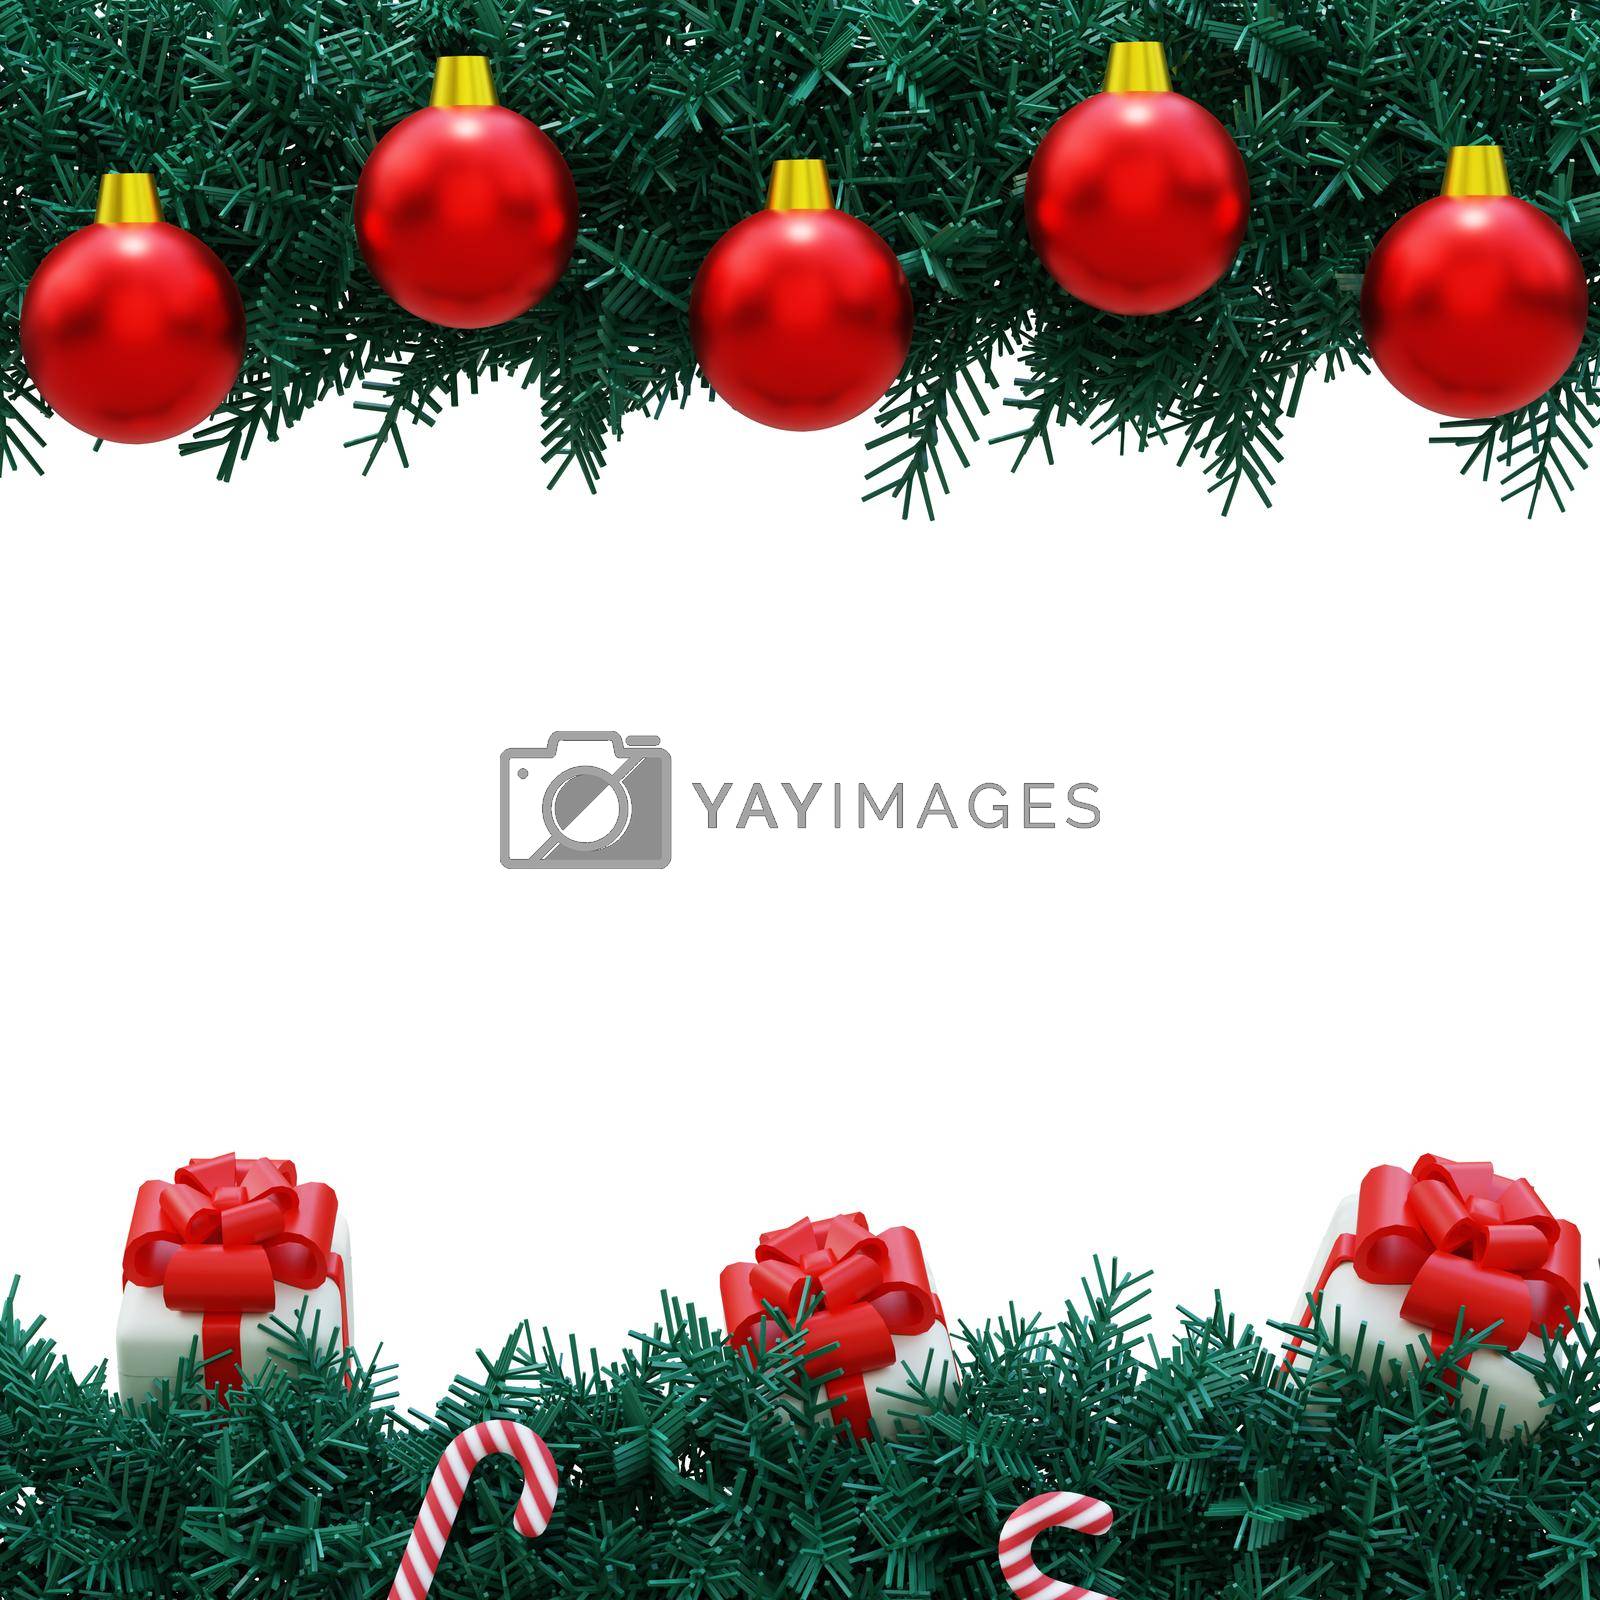 Royalty free image of merry christmas and new year concept by Rahmat_Djayusman